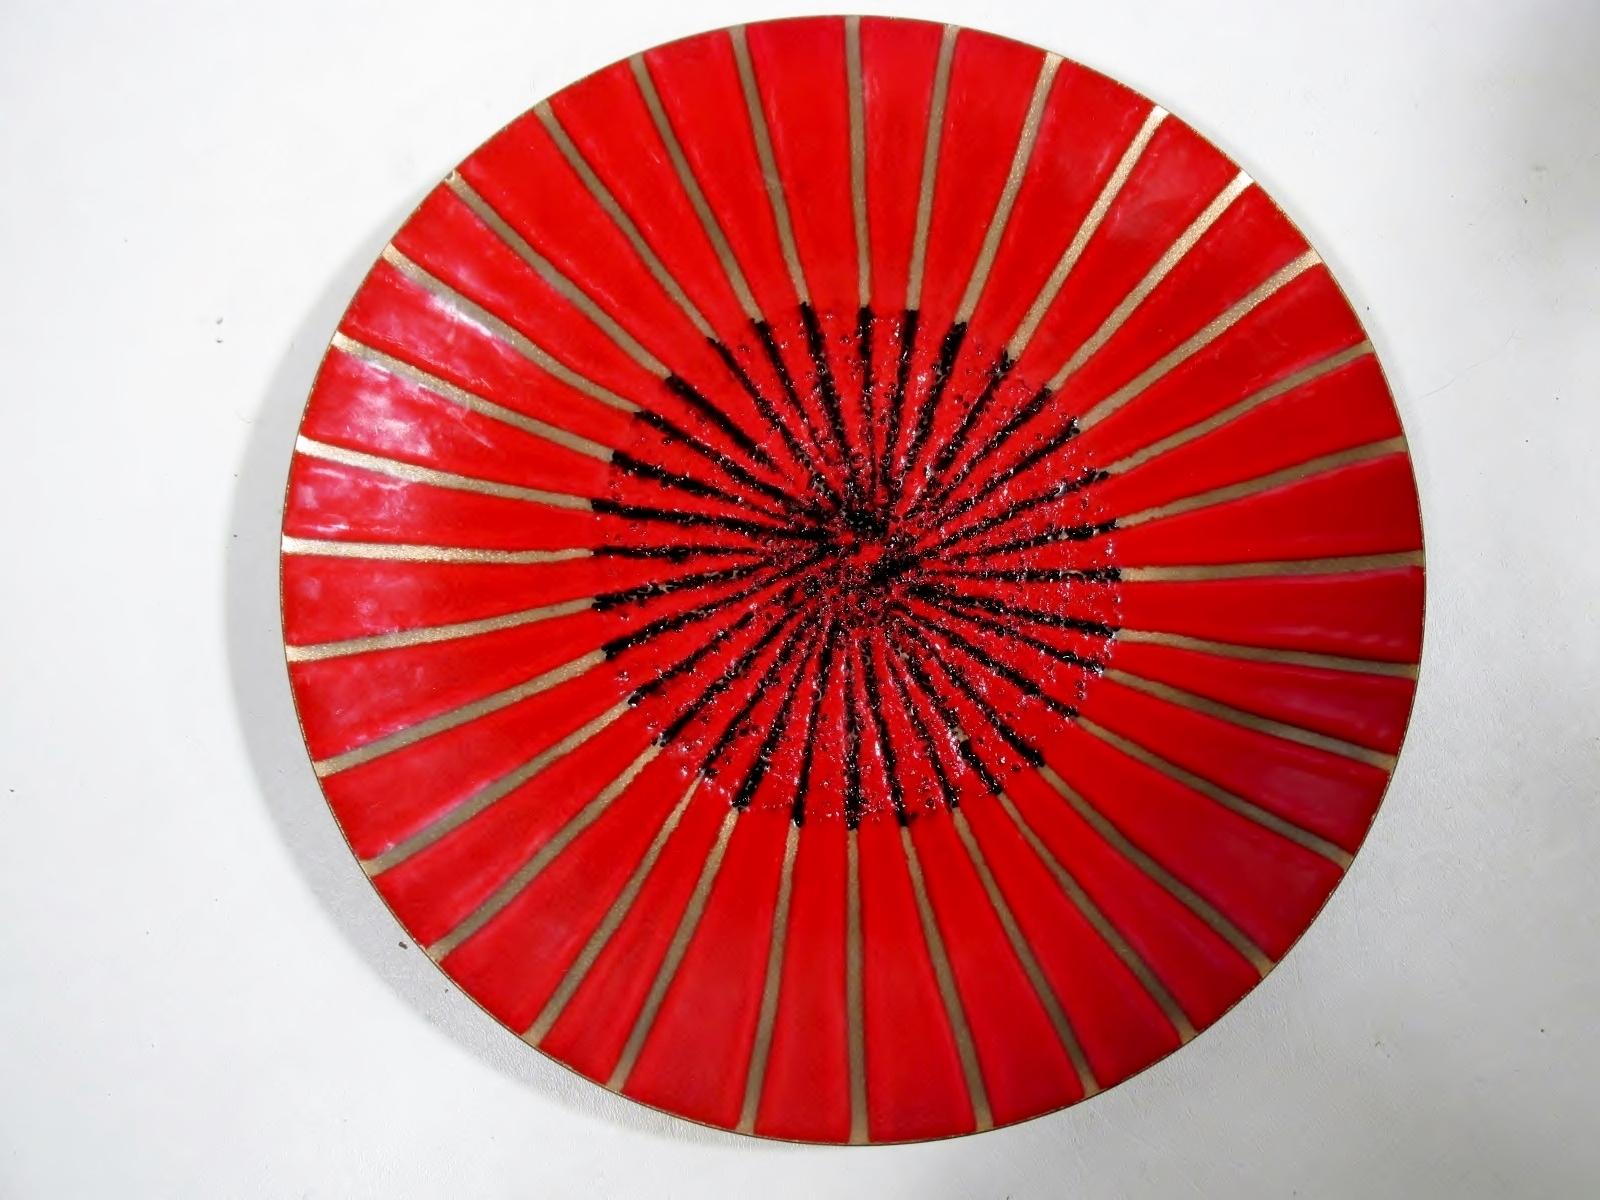 Unusual 11.75” diameter round modernist enamel on copper charger with an abstract starburst decoration by renowned California artisan Annemarie Davidson. 

Condition is excellent overall showing light use scuffing and no chips, cracks, repairs, or